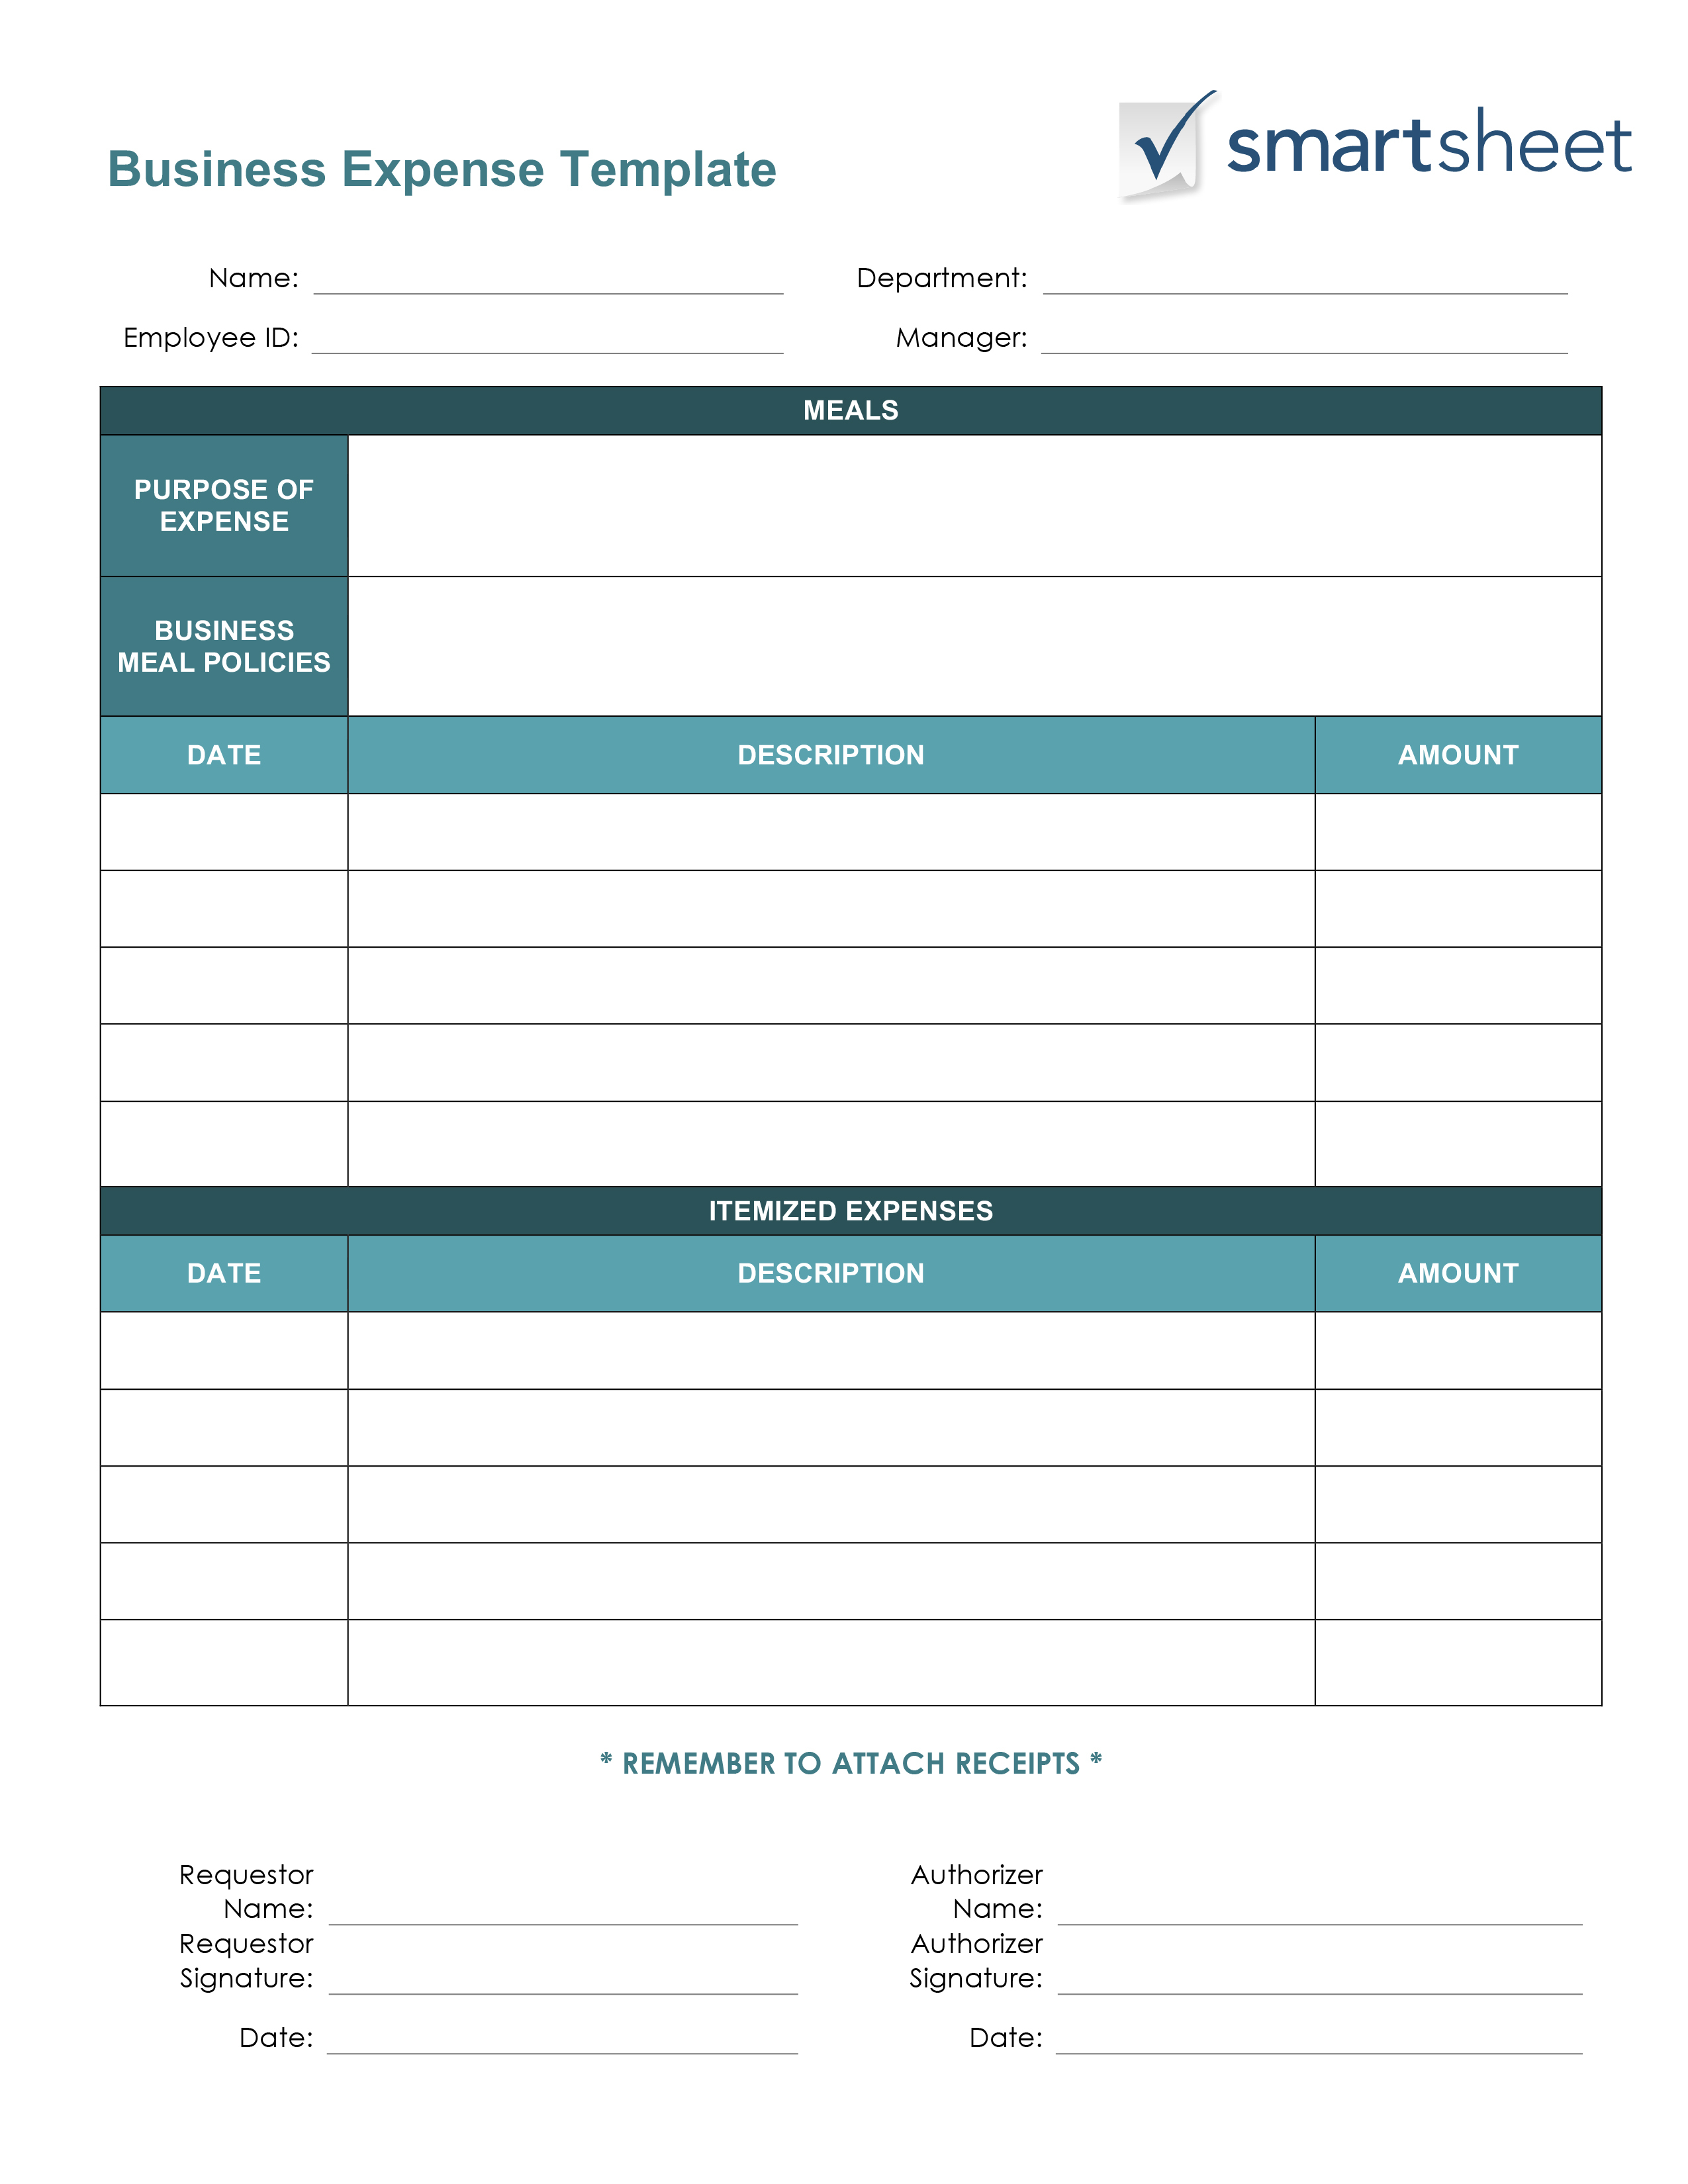 Free Expense Report Templates Smartsheet for Independent Contractor Expenses Spreadsheet